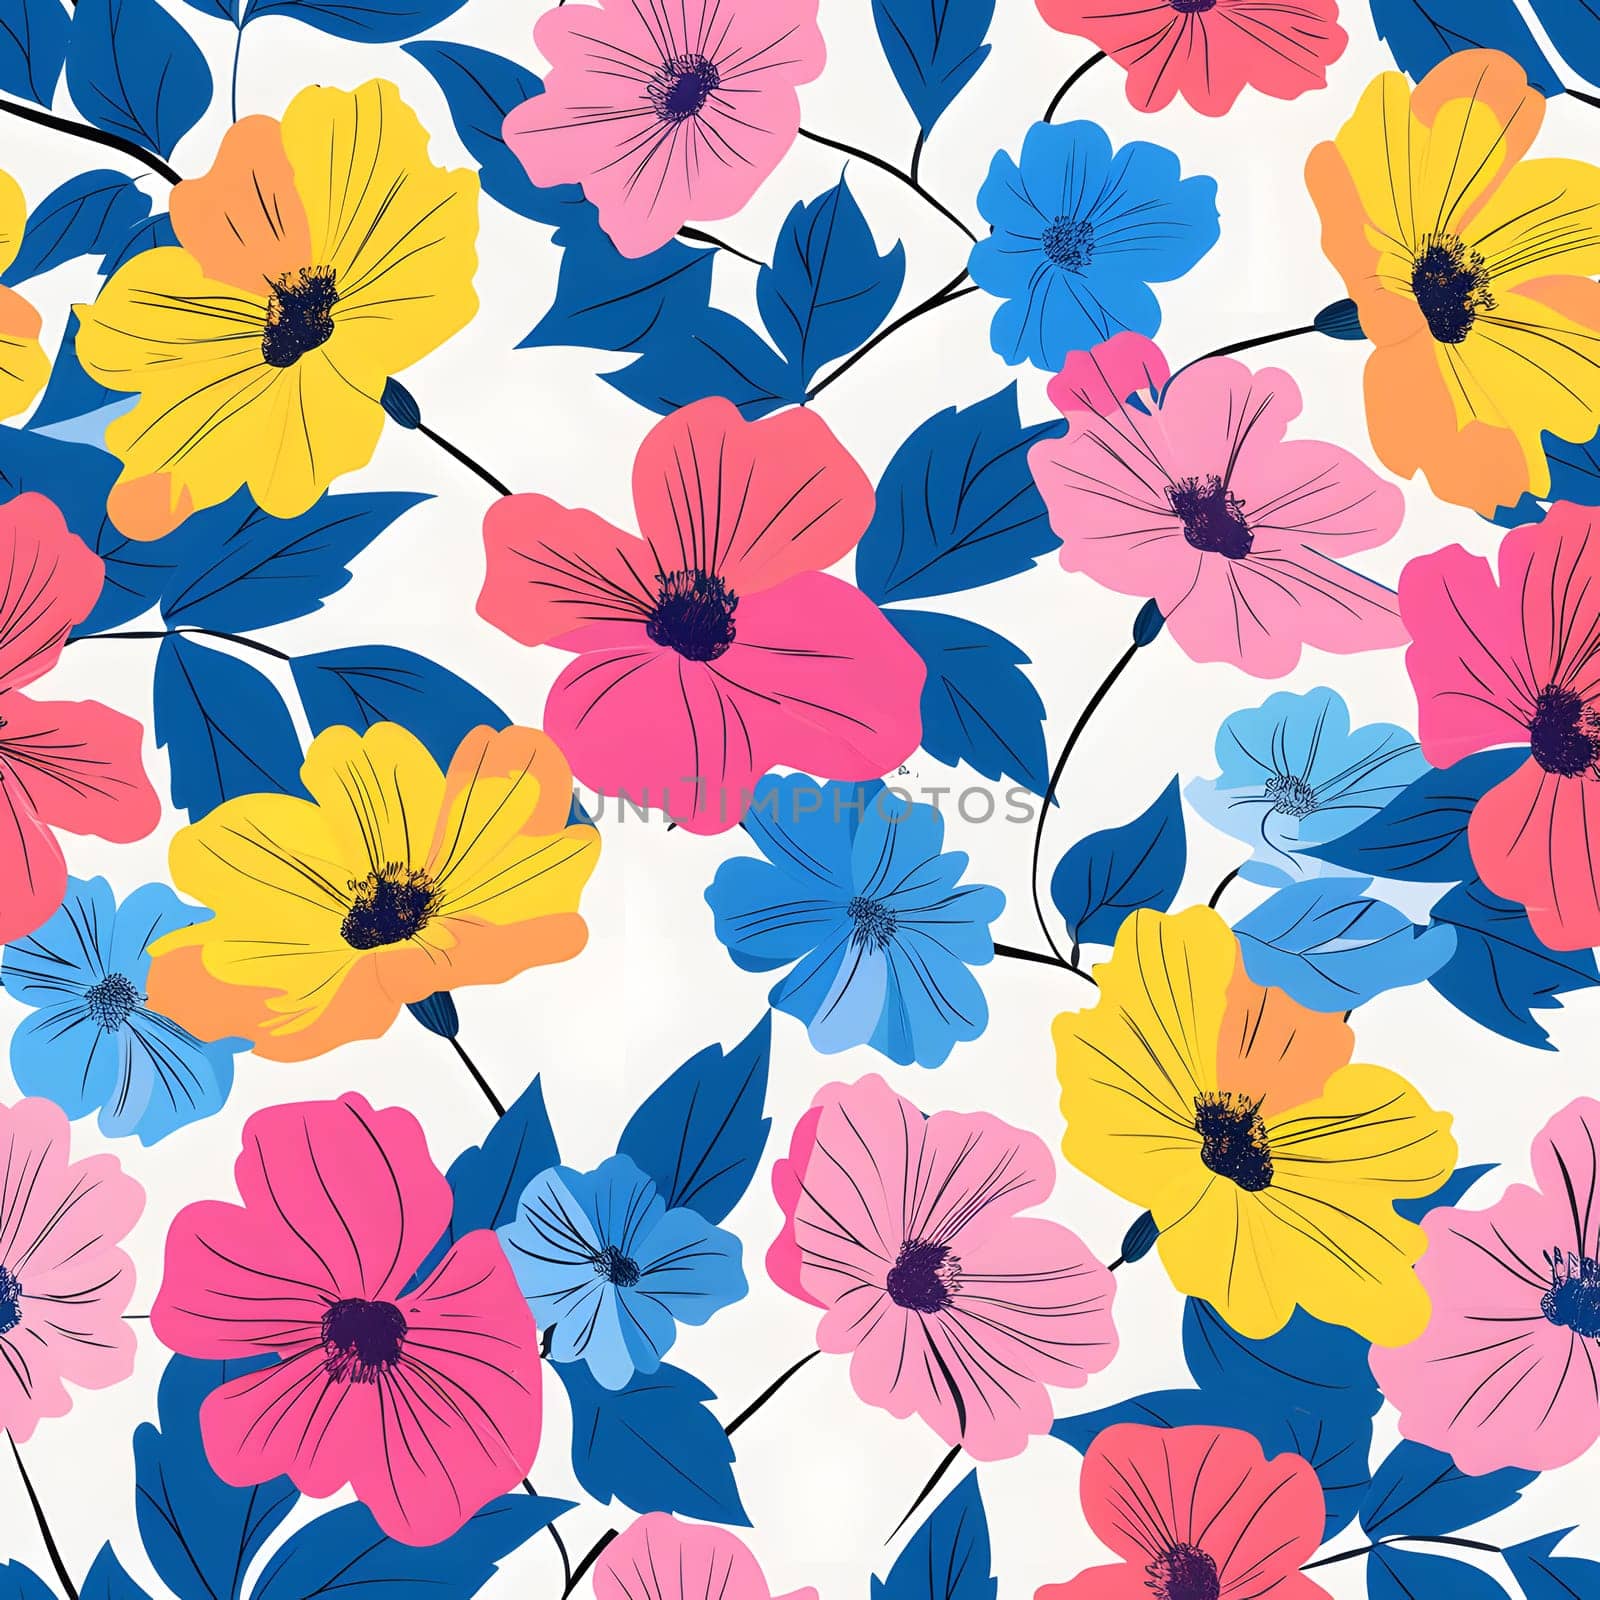 A vibrant pattern featuring colorful flowers, blue leaves, and white background. Ideal for textile products, this groundcover design includes orange petals and electric blue accents